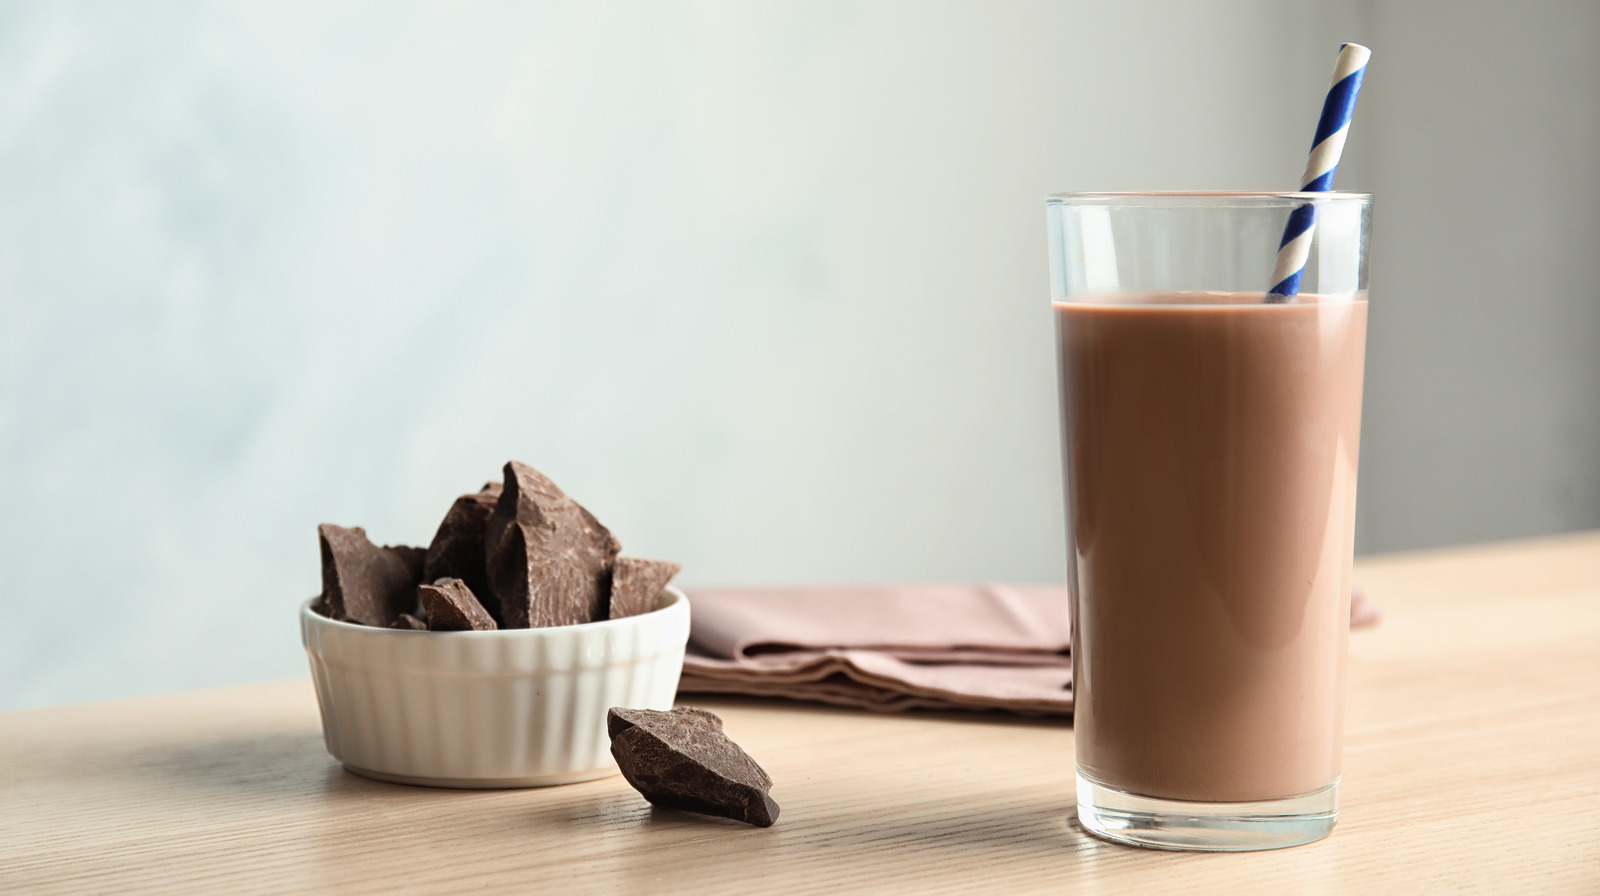 Slate Lactose Free Chocolate Milk: Taste Test and Thoughts